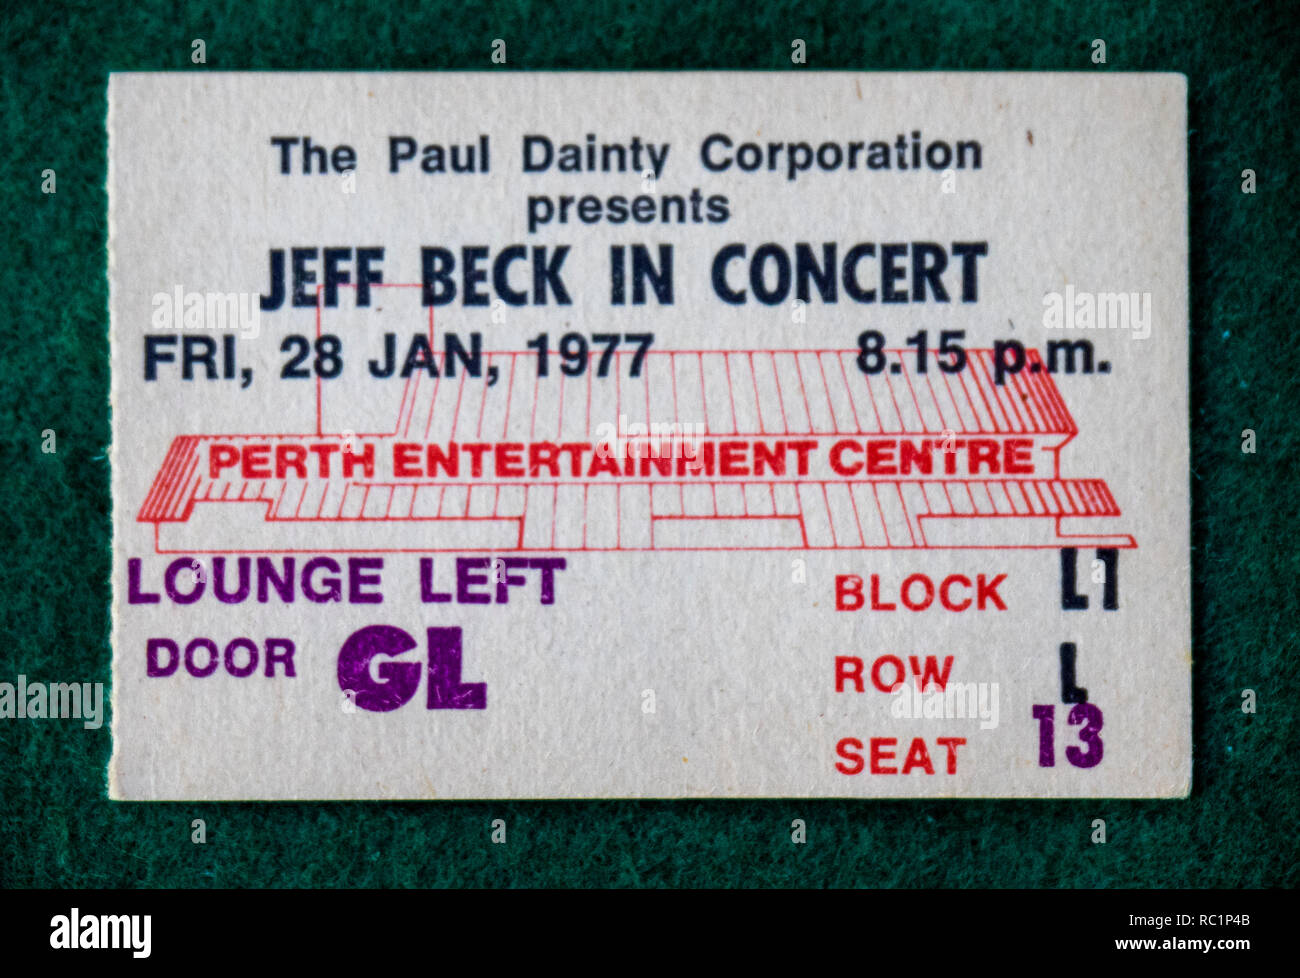 Ticket for Jeff Beck concert at Perth Entertainment Centre in 1977 WA Australia. Stock Photo